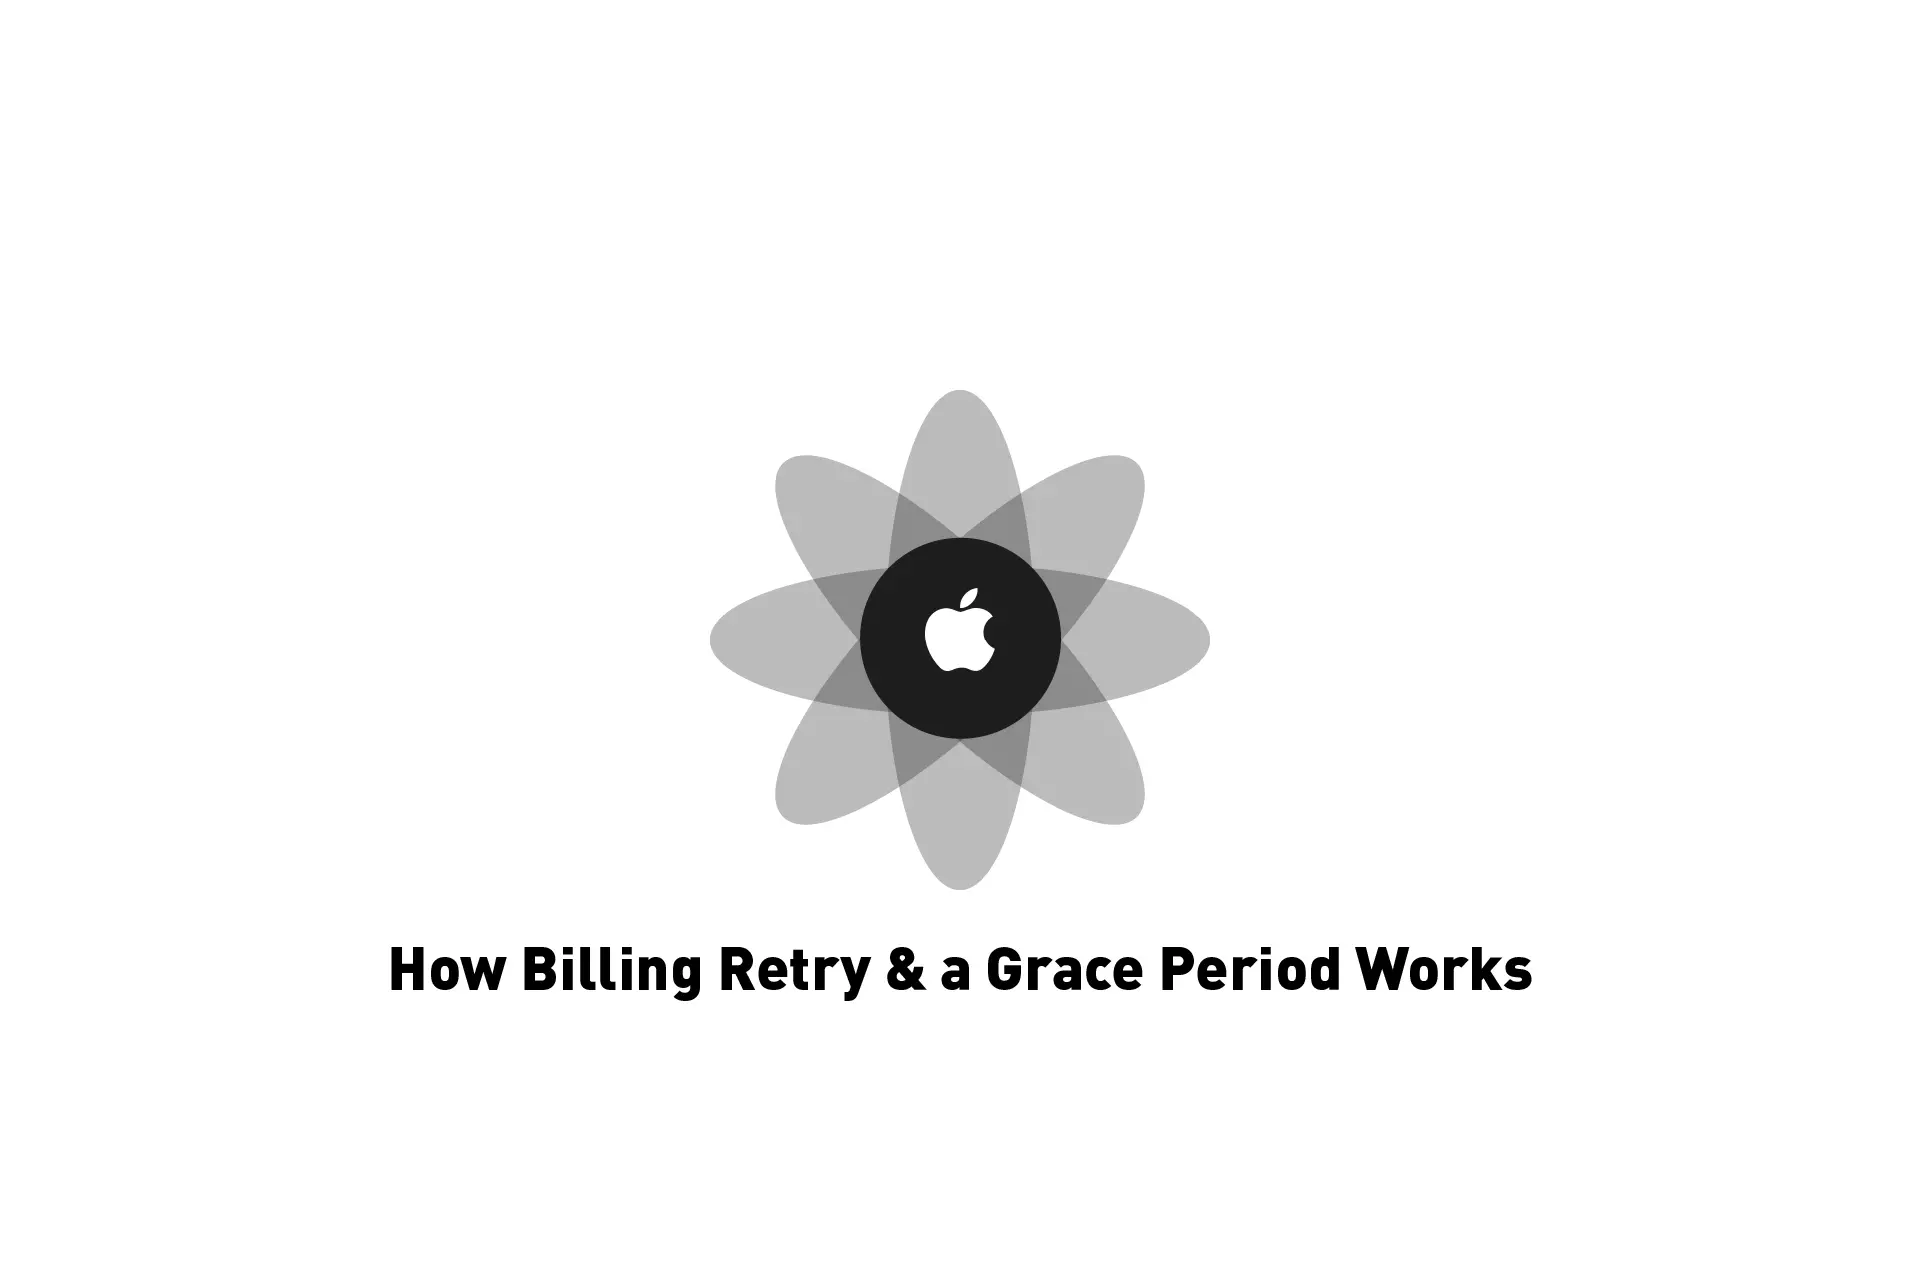 A flower that represents Apple with the text "How Billing Retry & a Grace Period Works" beneath it.